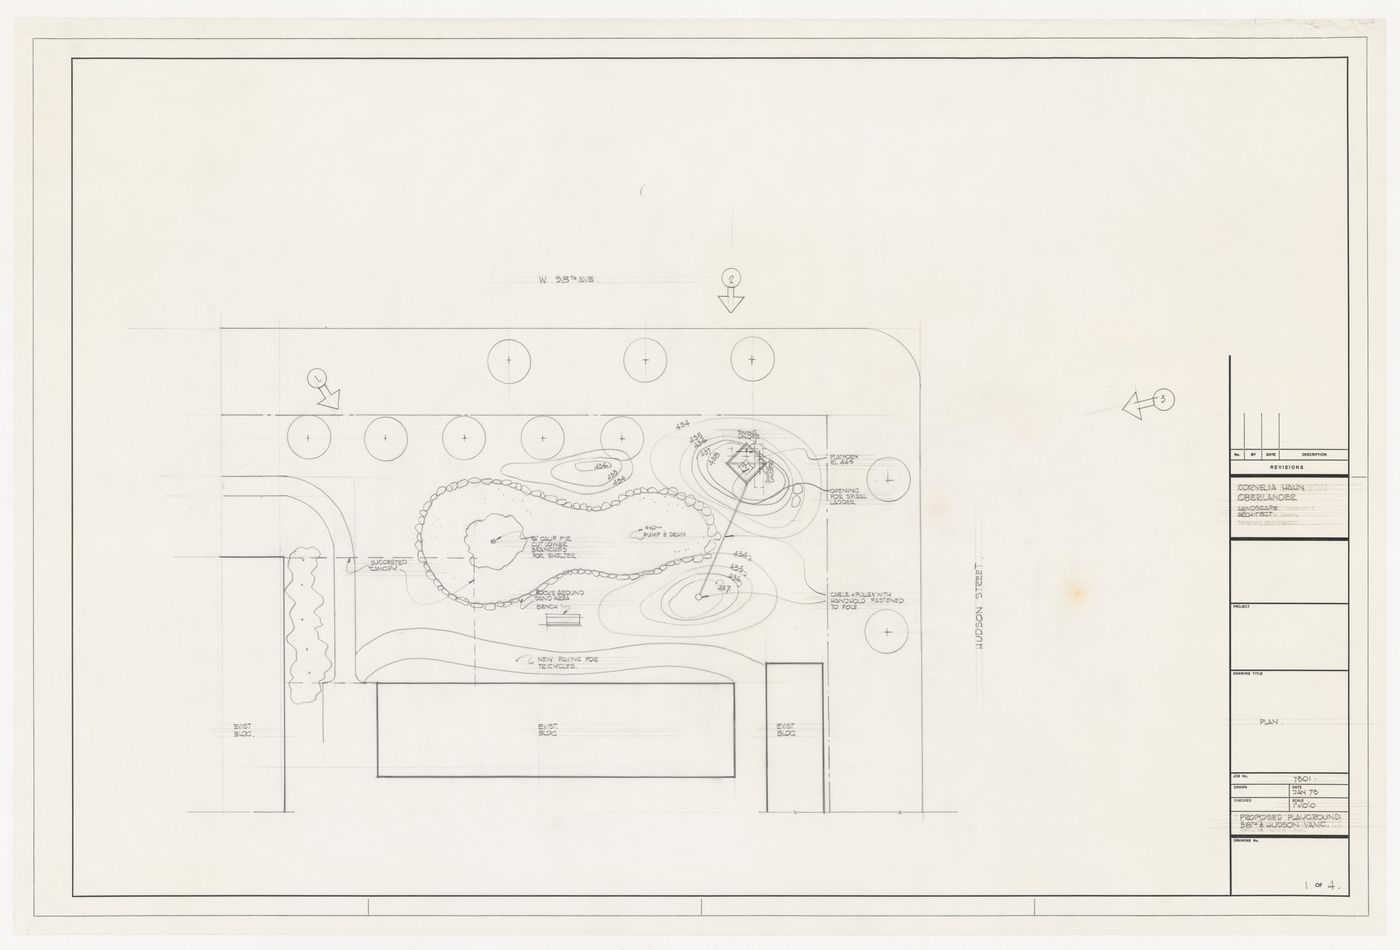 Site plan for Playground, 38th and Hoodson, Vancouver, British Columbia